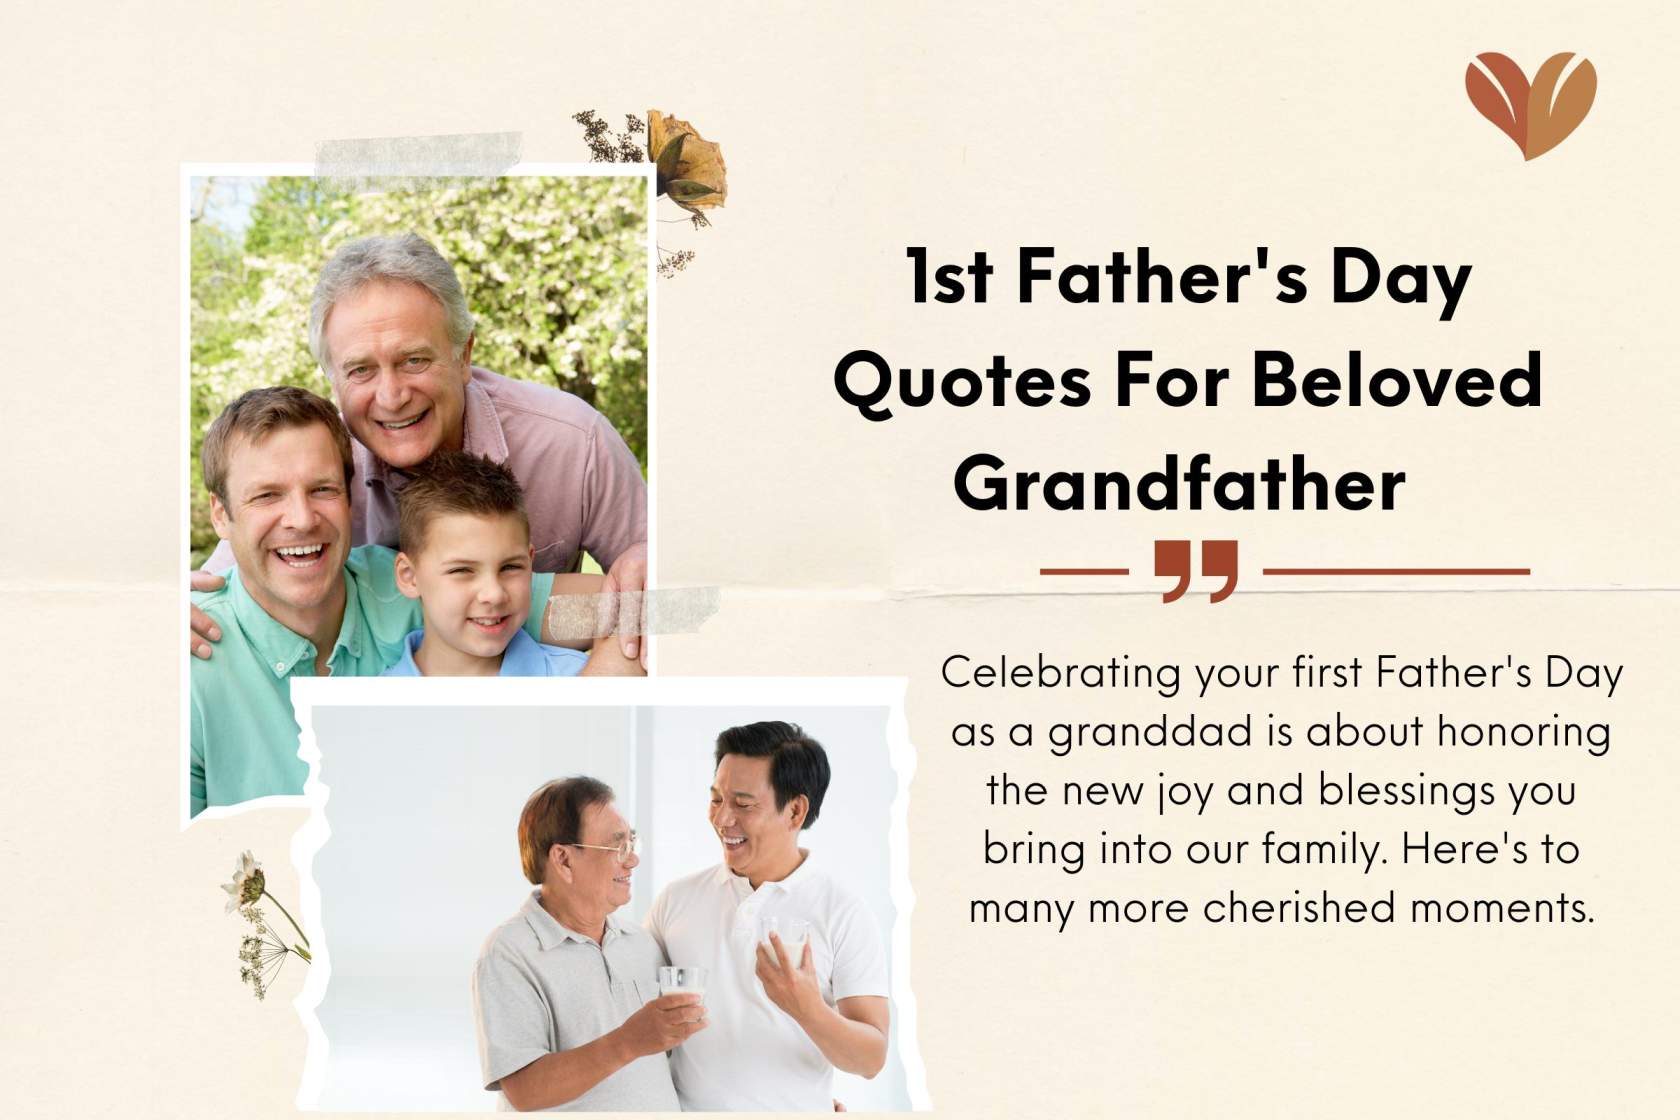 1st Father's Day Quotes For Beloved Grandfather